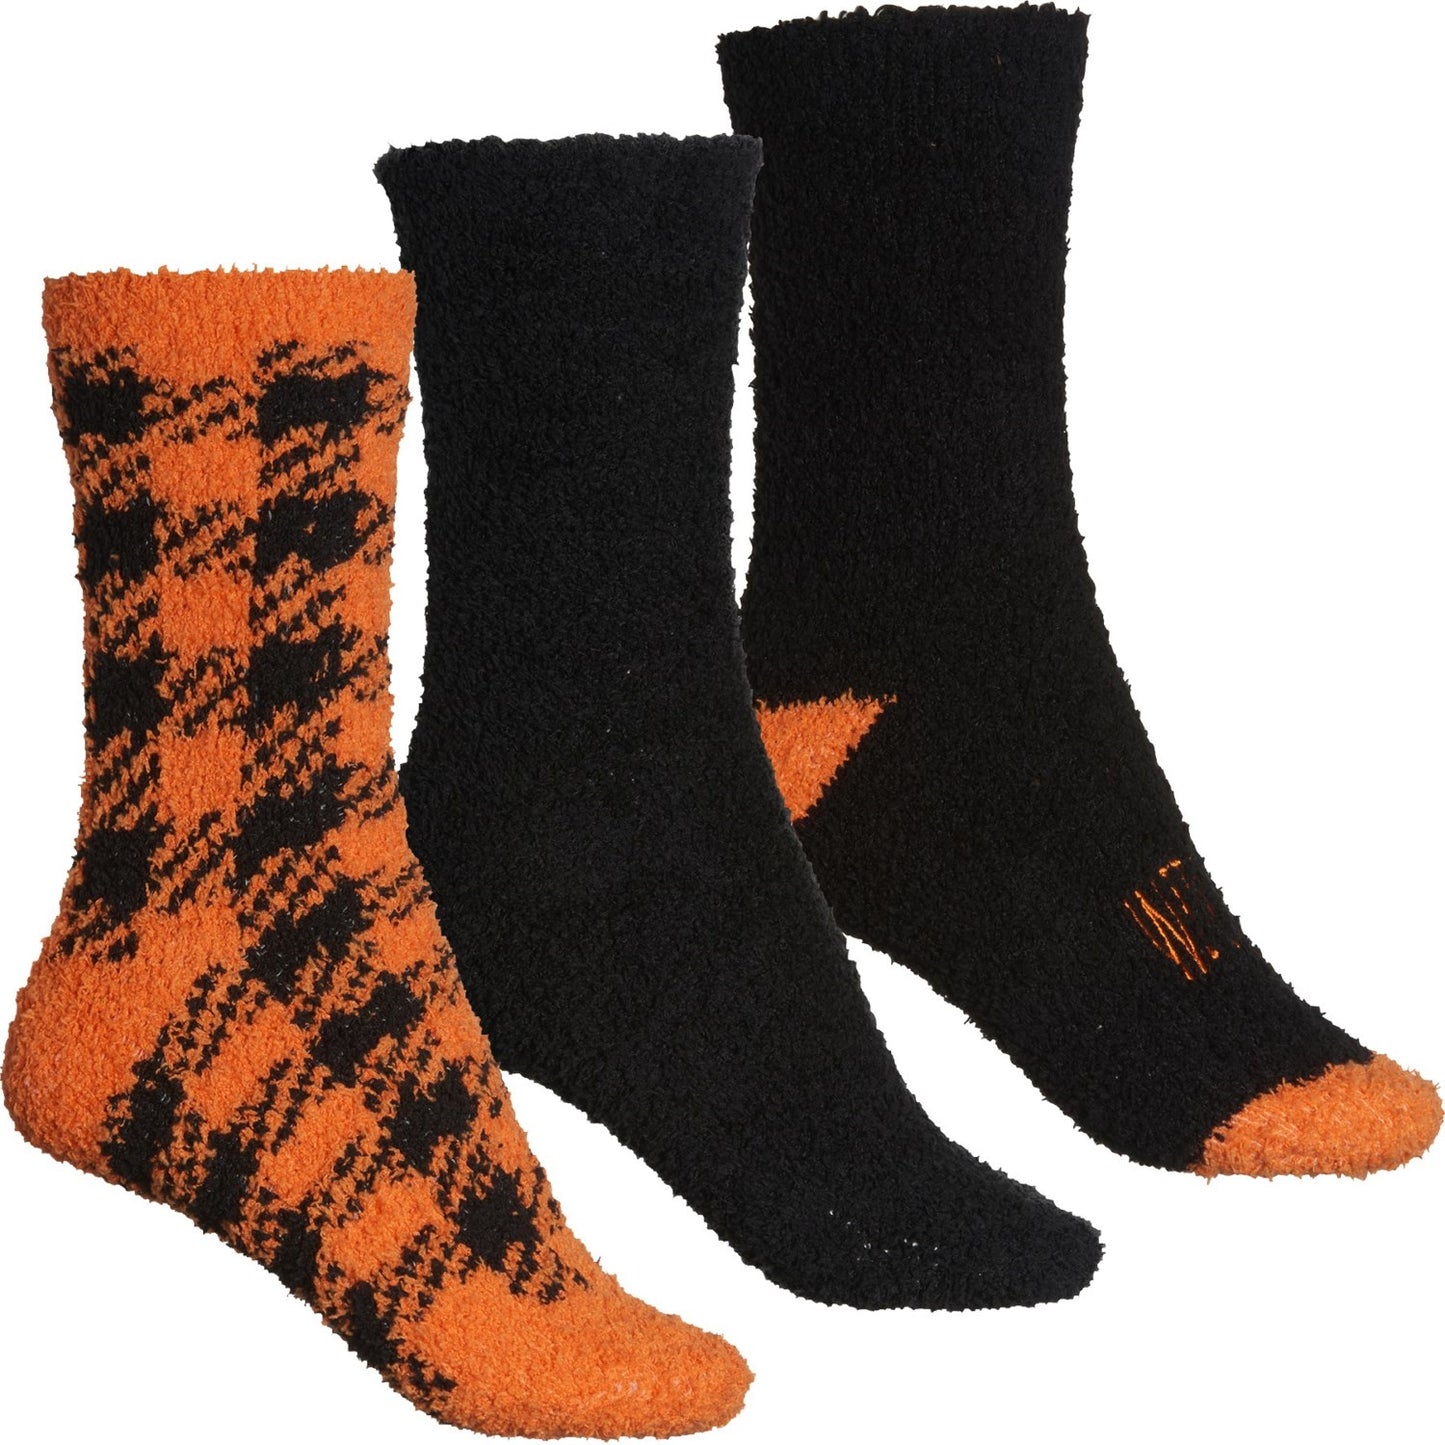 Rae Dunn Women's 3-Pack Soft Plush Halloween Candy Witch Cozy Crew Socks